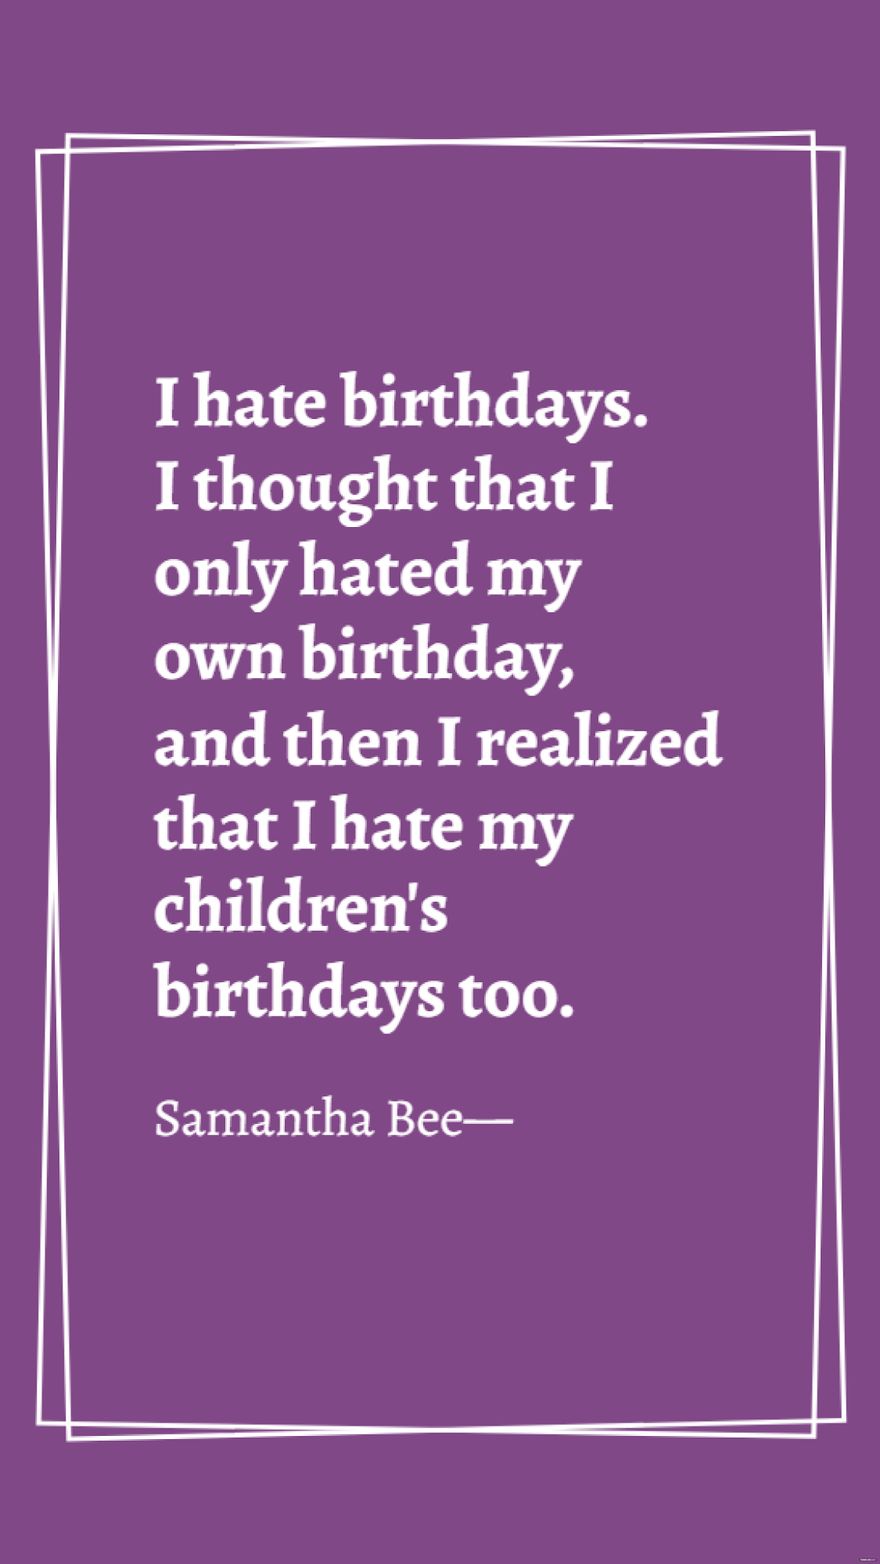 Free Samantha Bee - I hate birthdays. I thought that I only hated my own birthday, and then I realized that I hate my children's birthdays too.